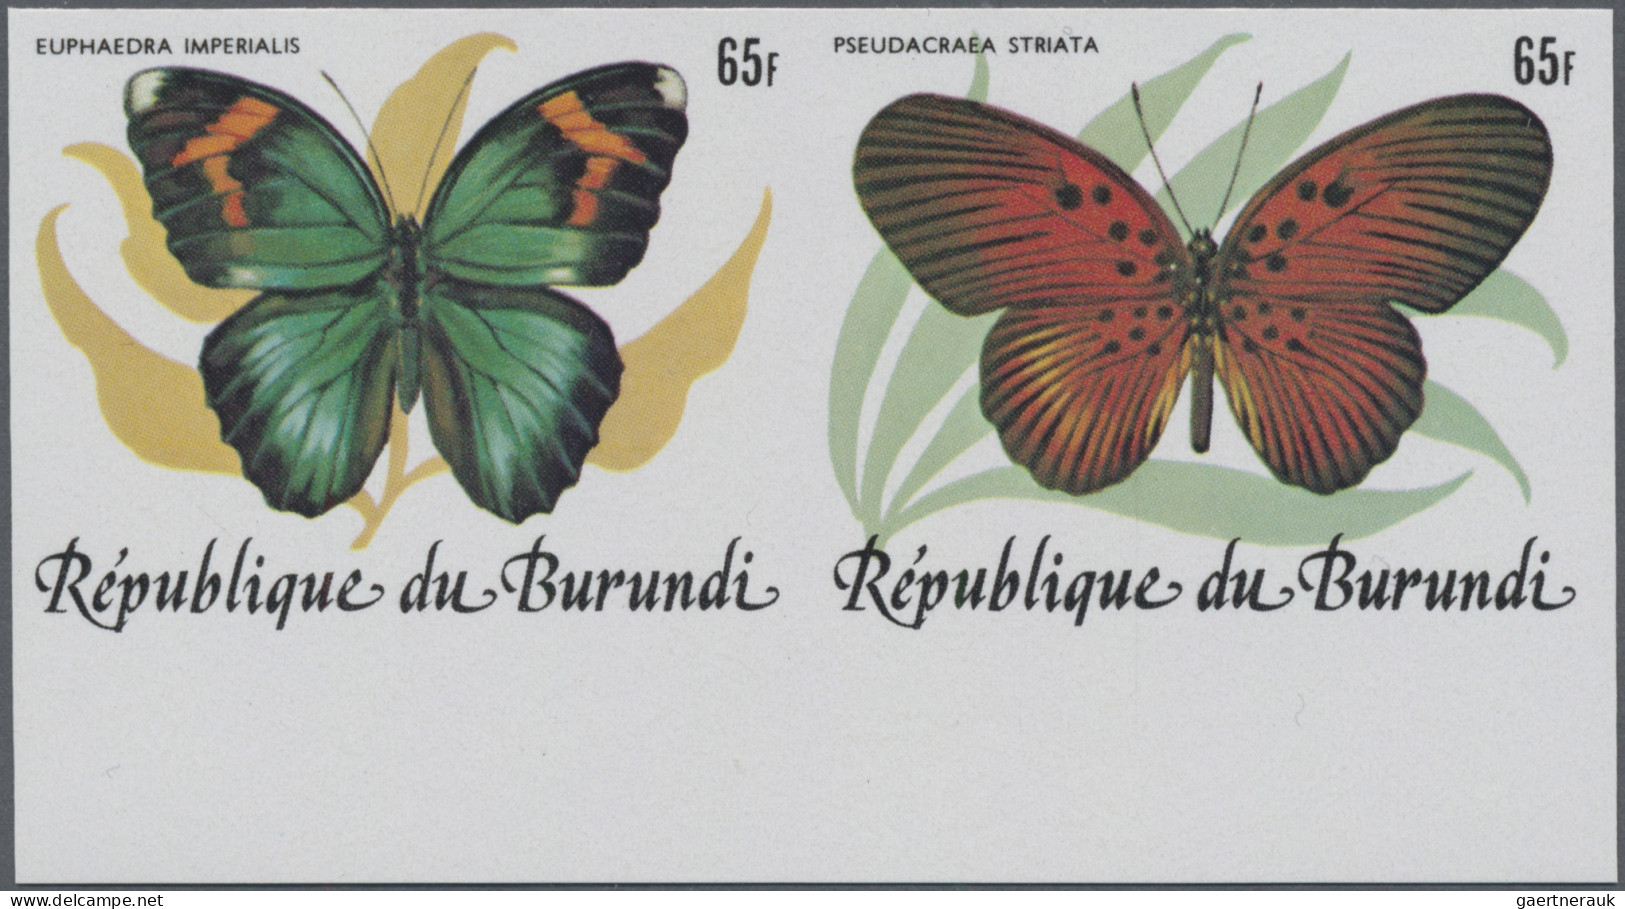 Burundi: 1984: Butterflies, Se-tenant 5 Pairs Of Perforated (COB 385 €) And Impe - Nuevos